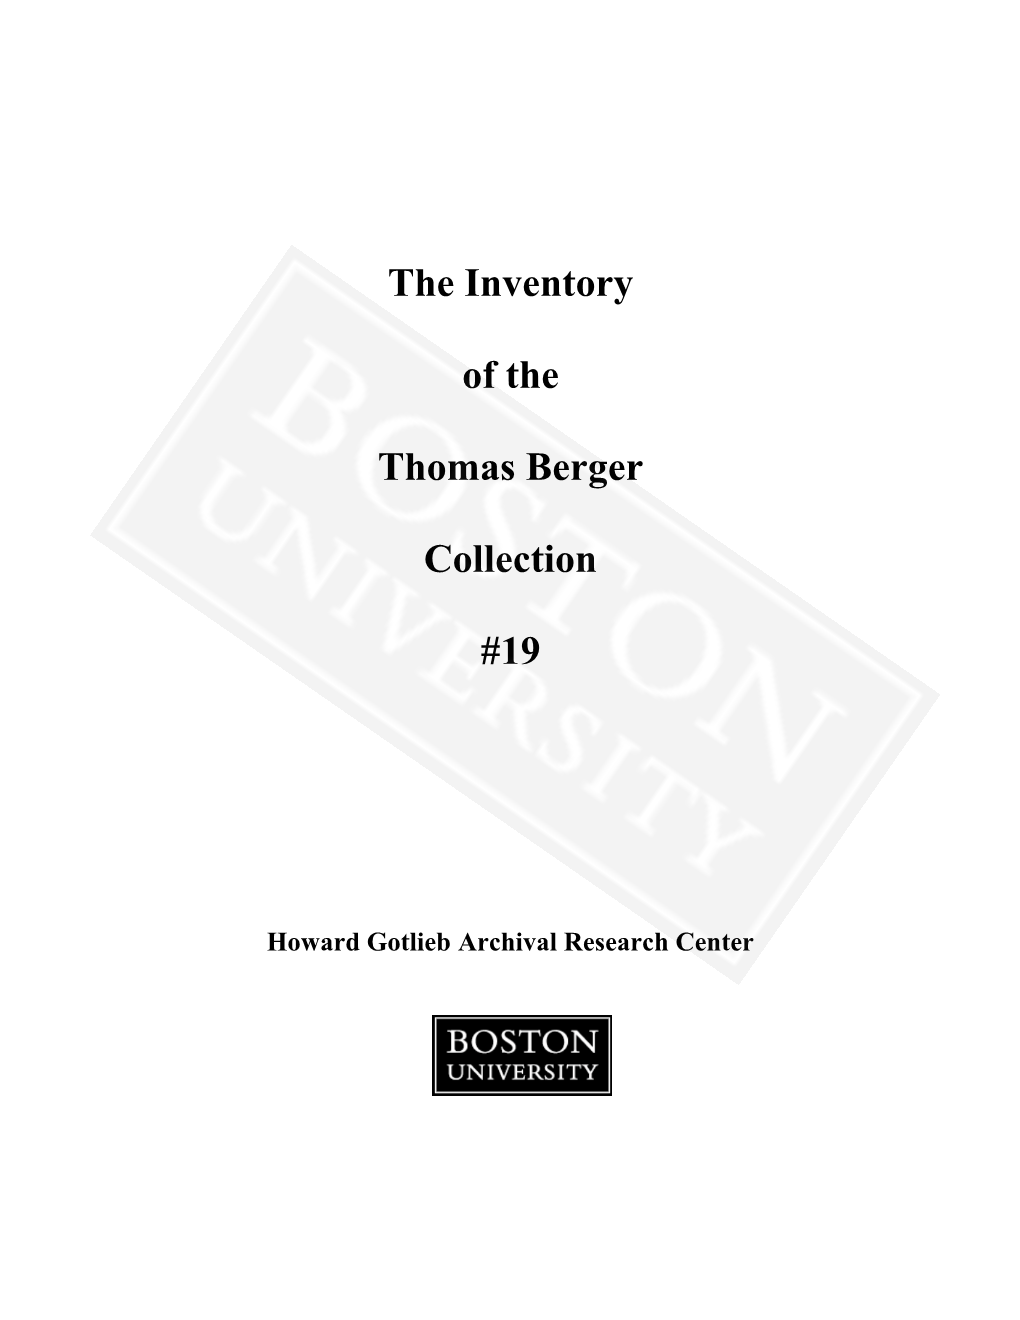 The Inventory of the Thomas Berger Collection